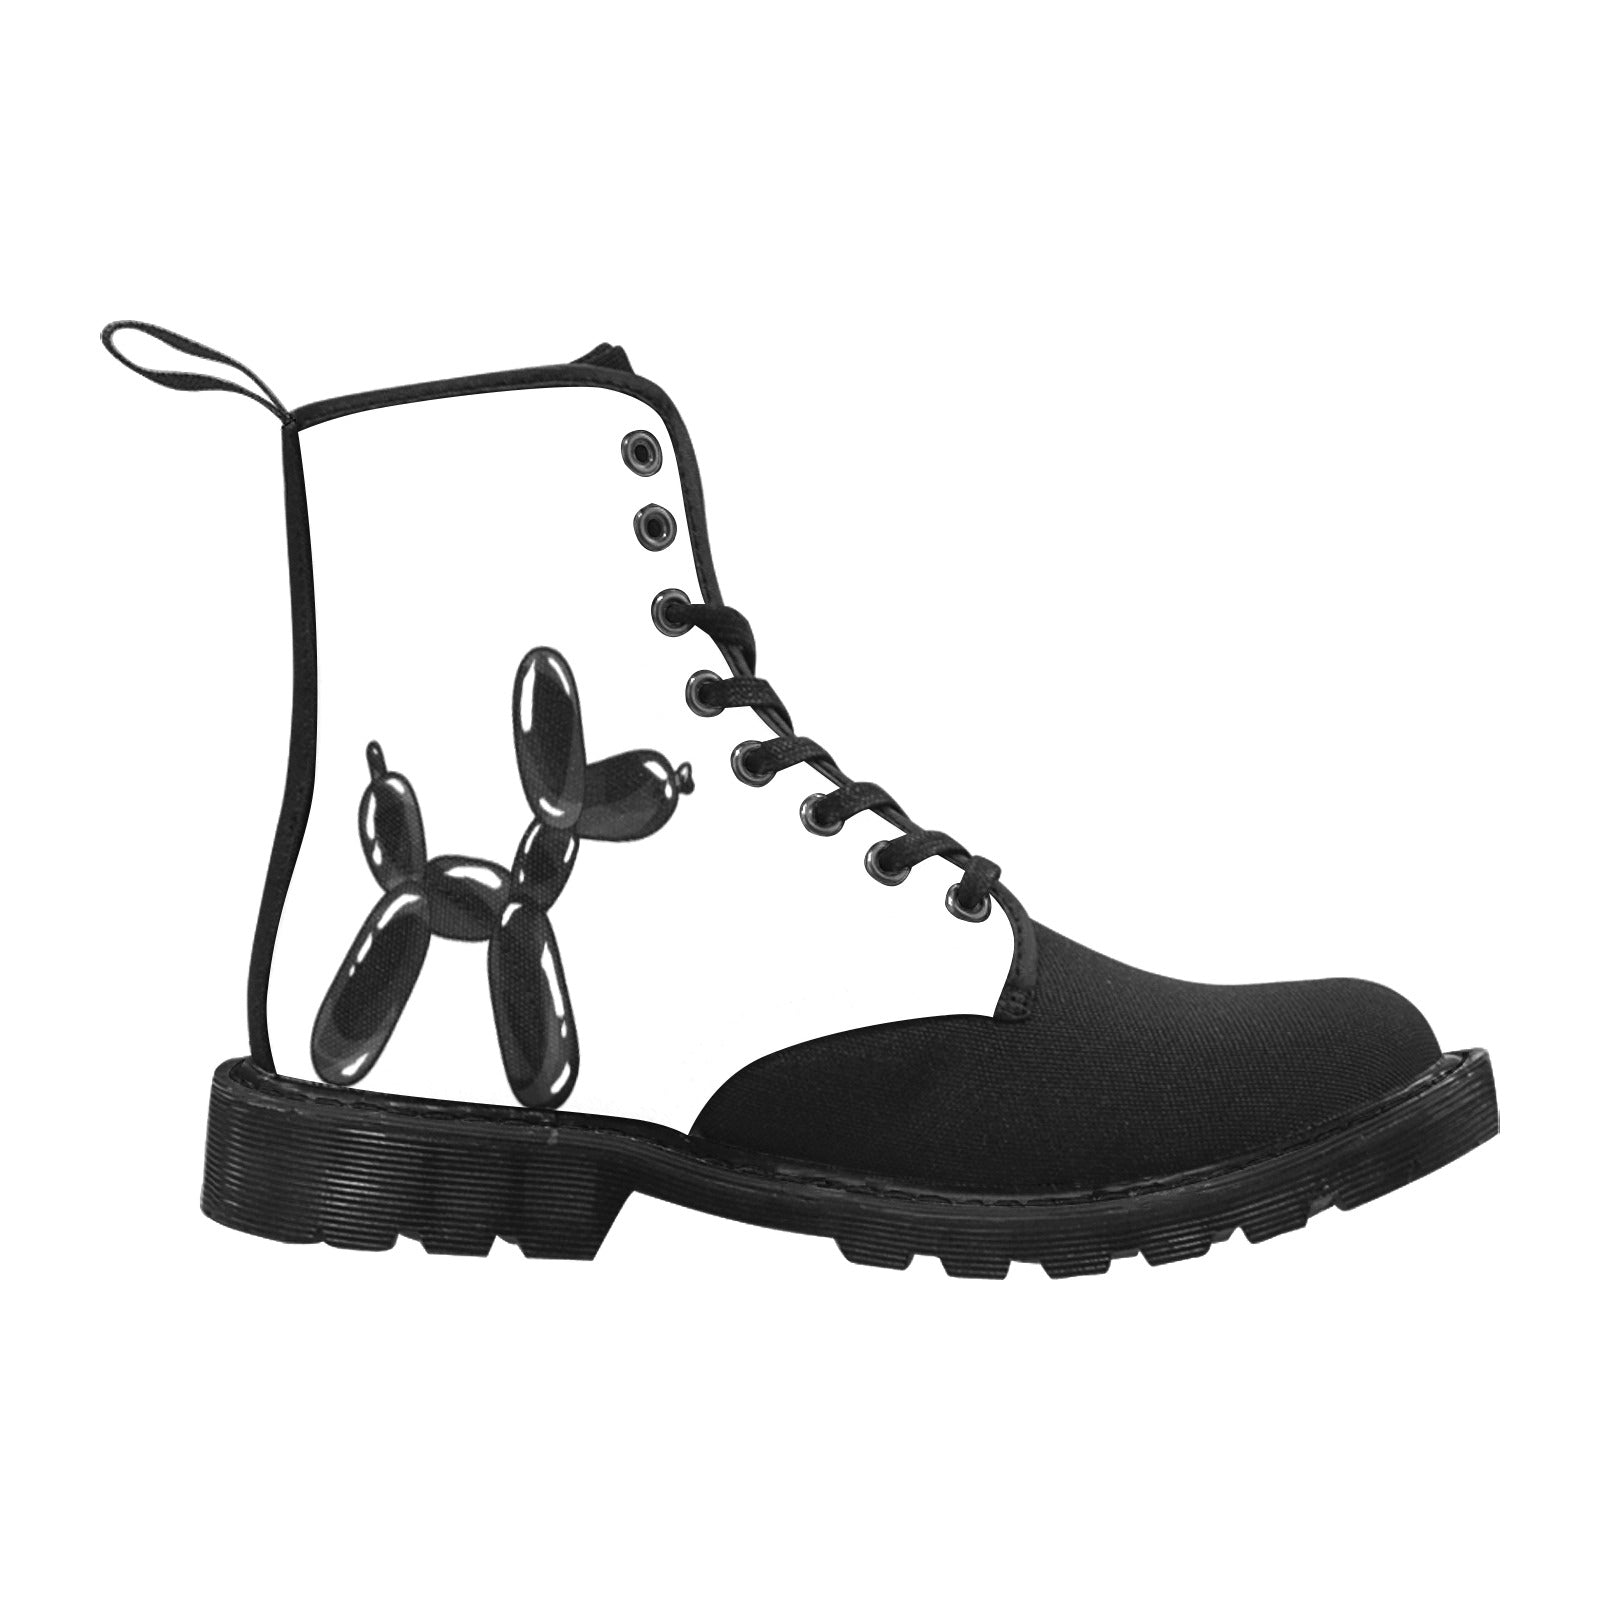 Balloon Dog Boots for Balloon Artists and party entertainers